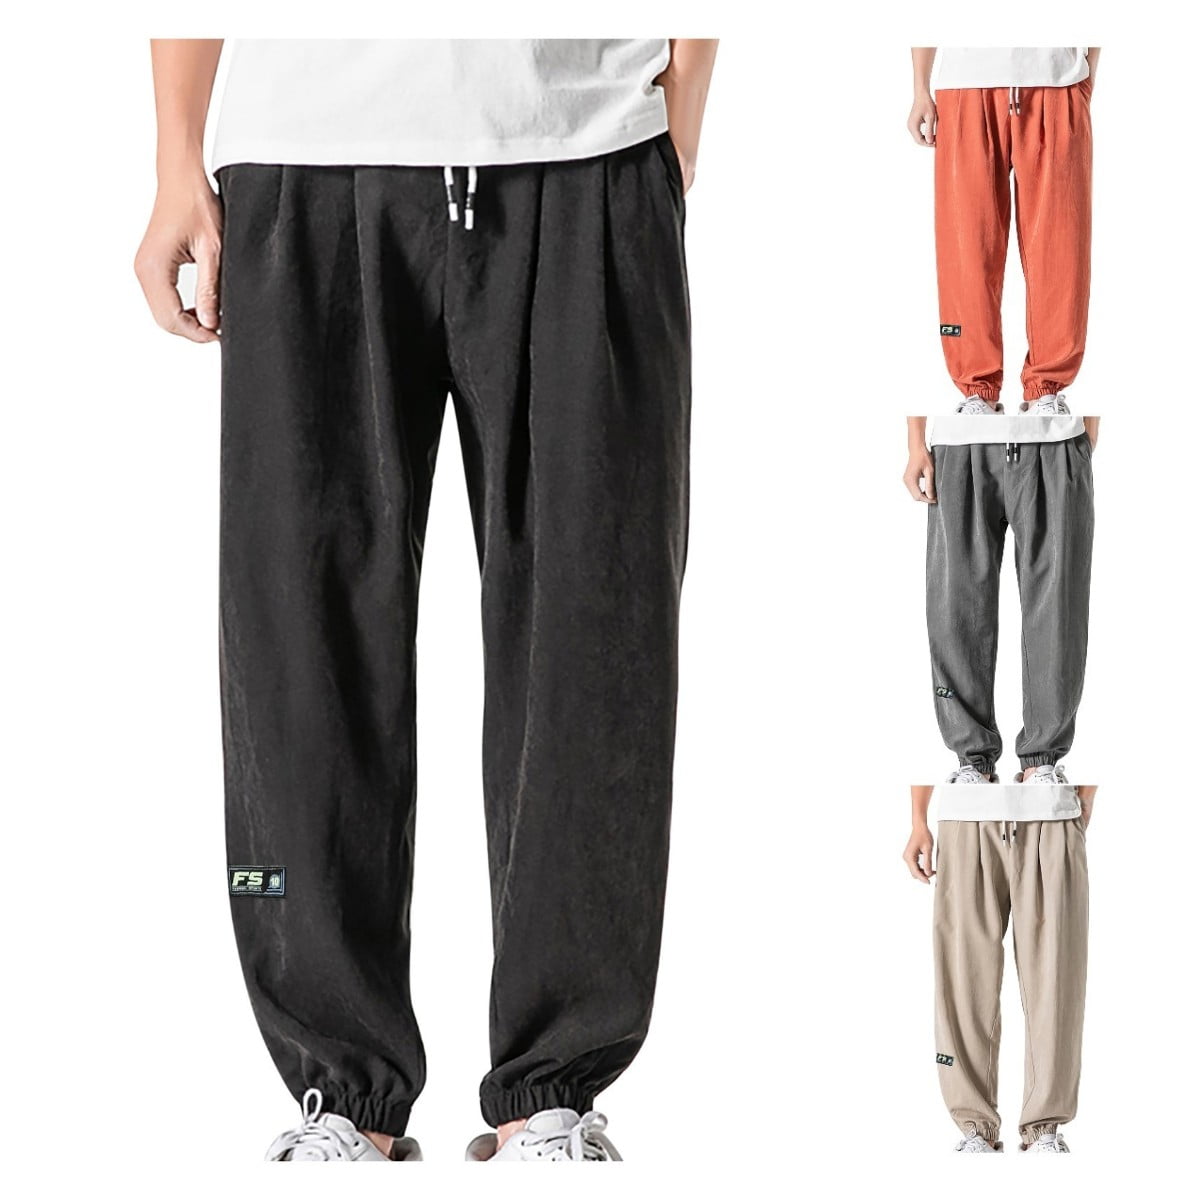 Mitankcoo Jogging Pants for Men - Casual Cotton Sweat Pants with ...